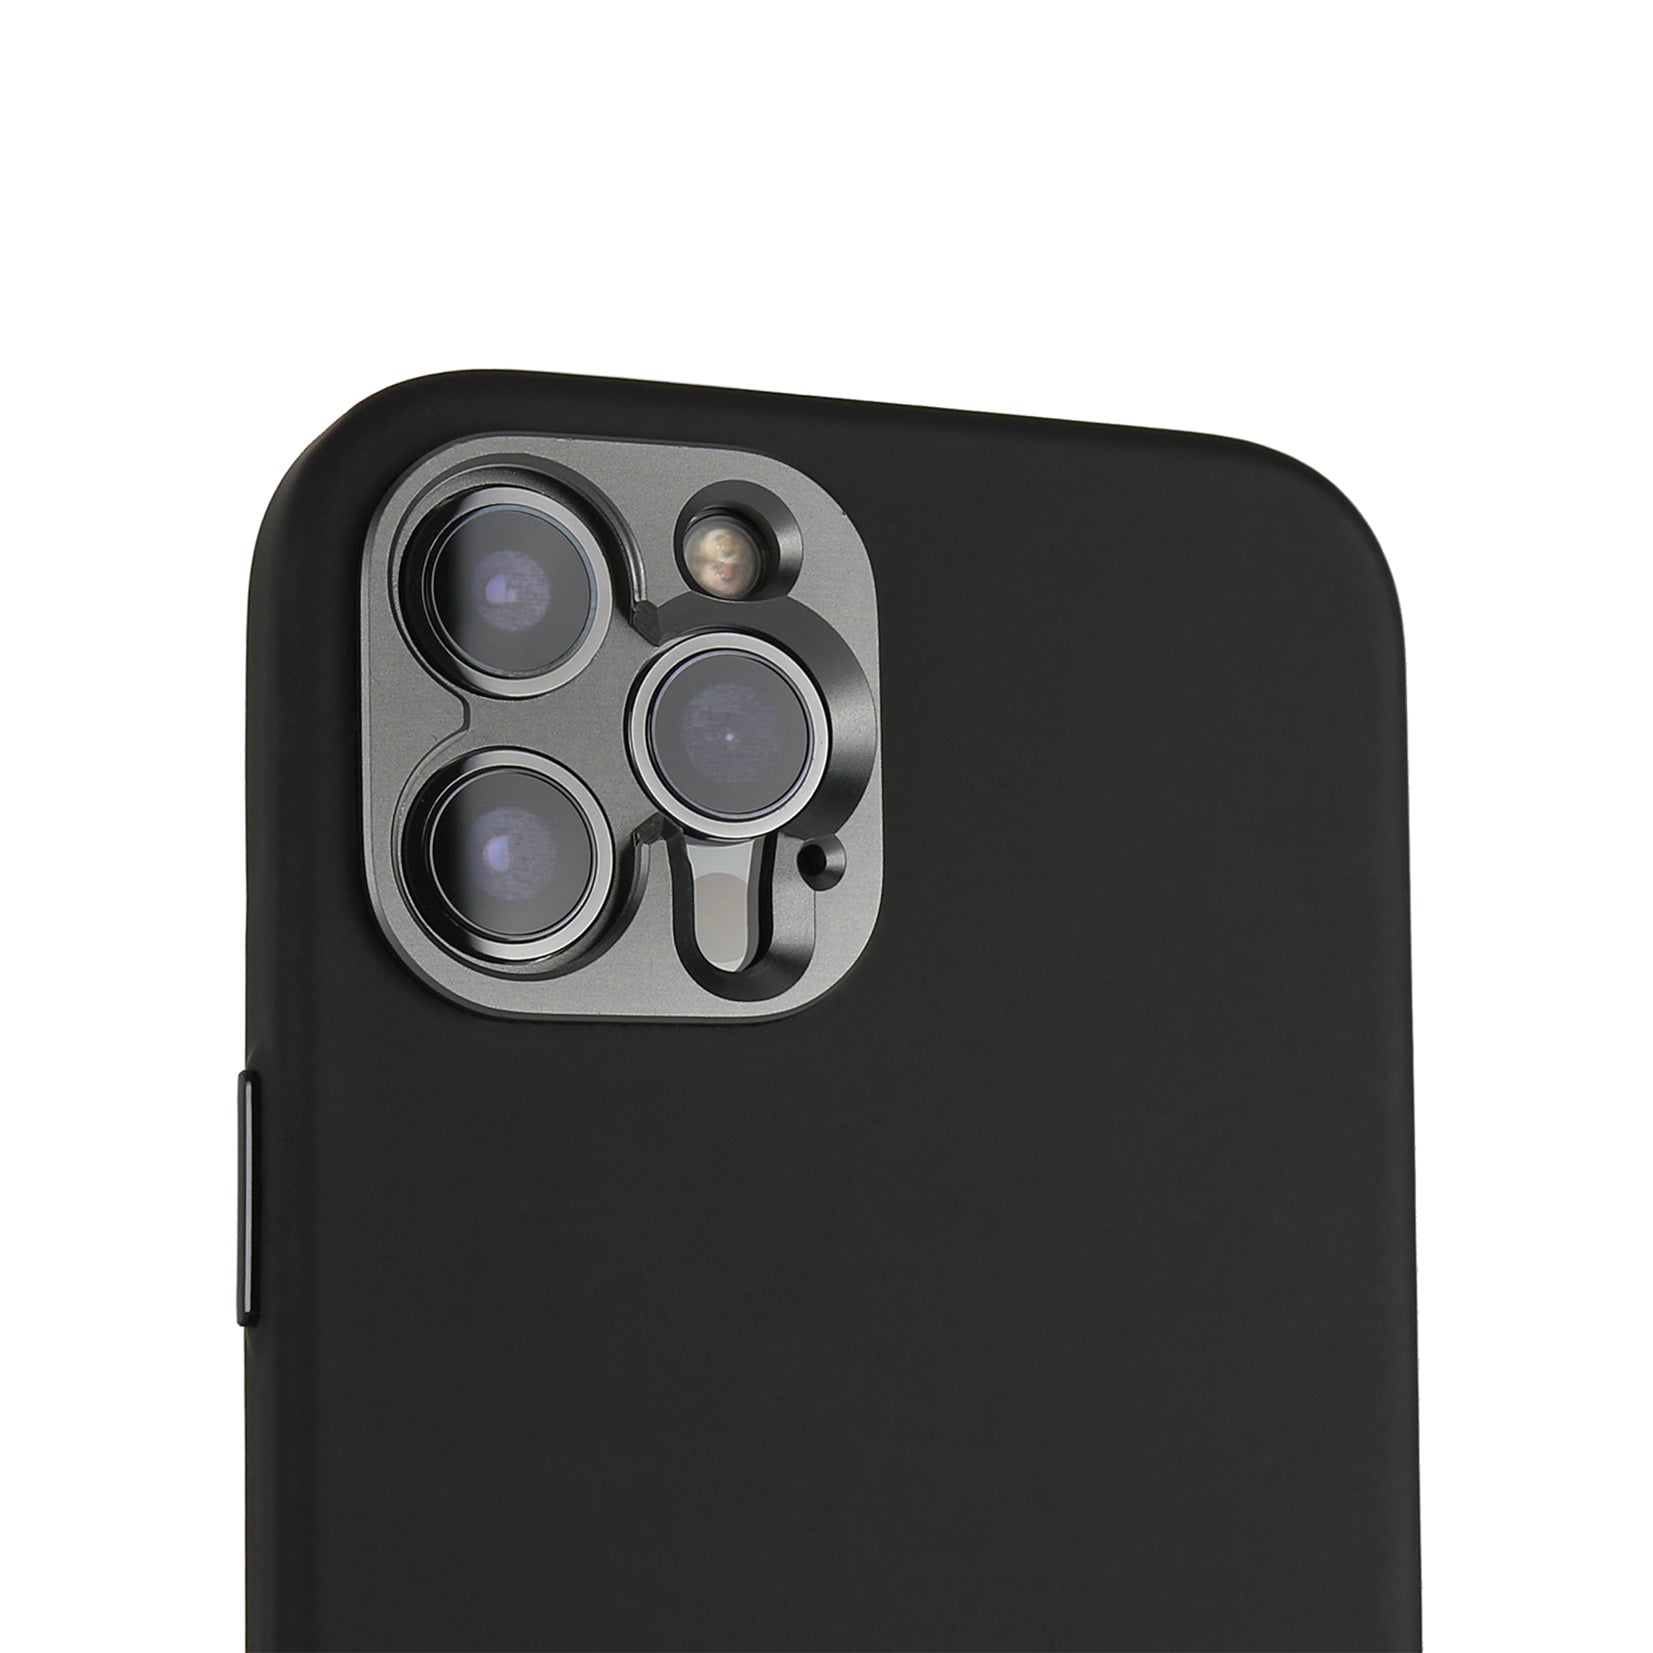 13 pro case with